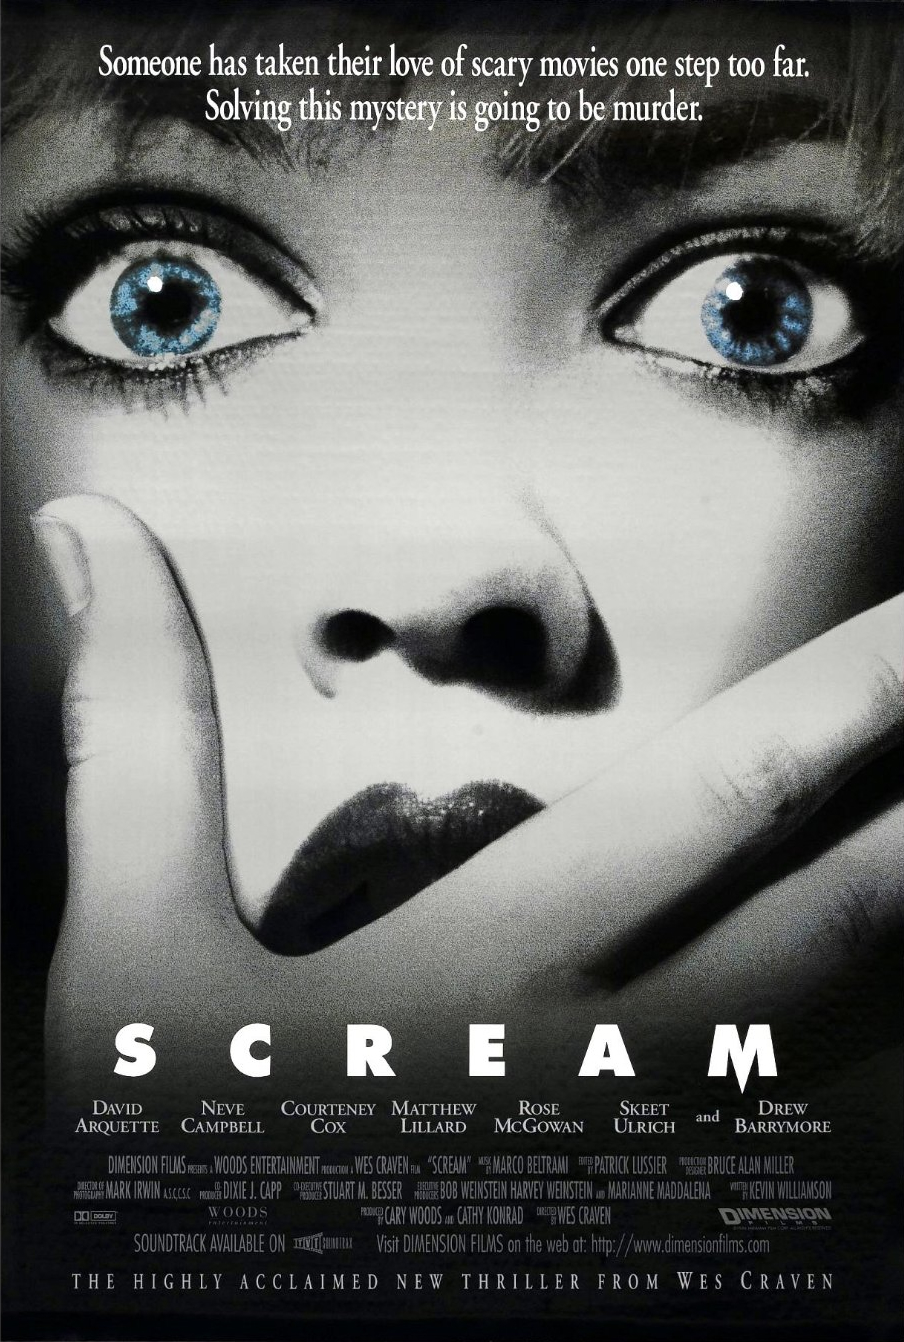 Ghostface; Scream
(Provided by Dimension Films and Woods Entertainment)